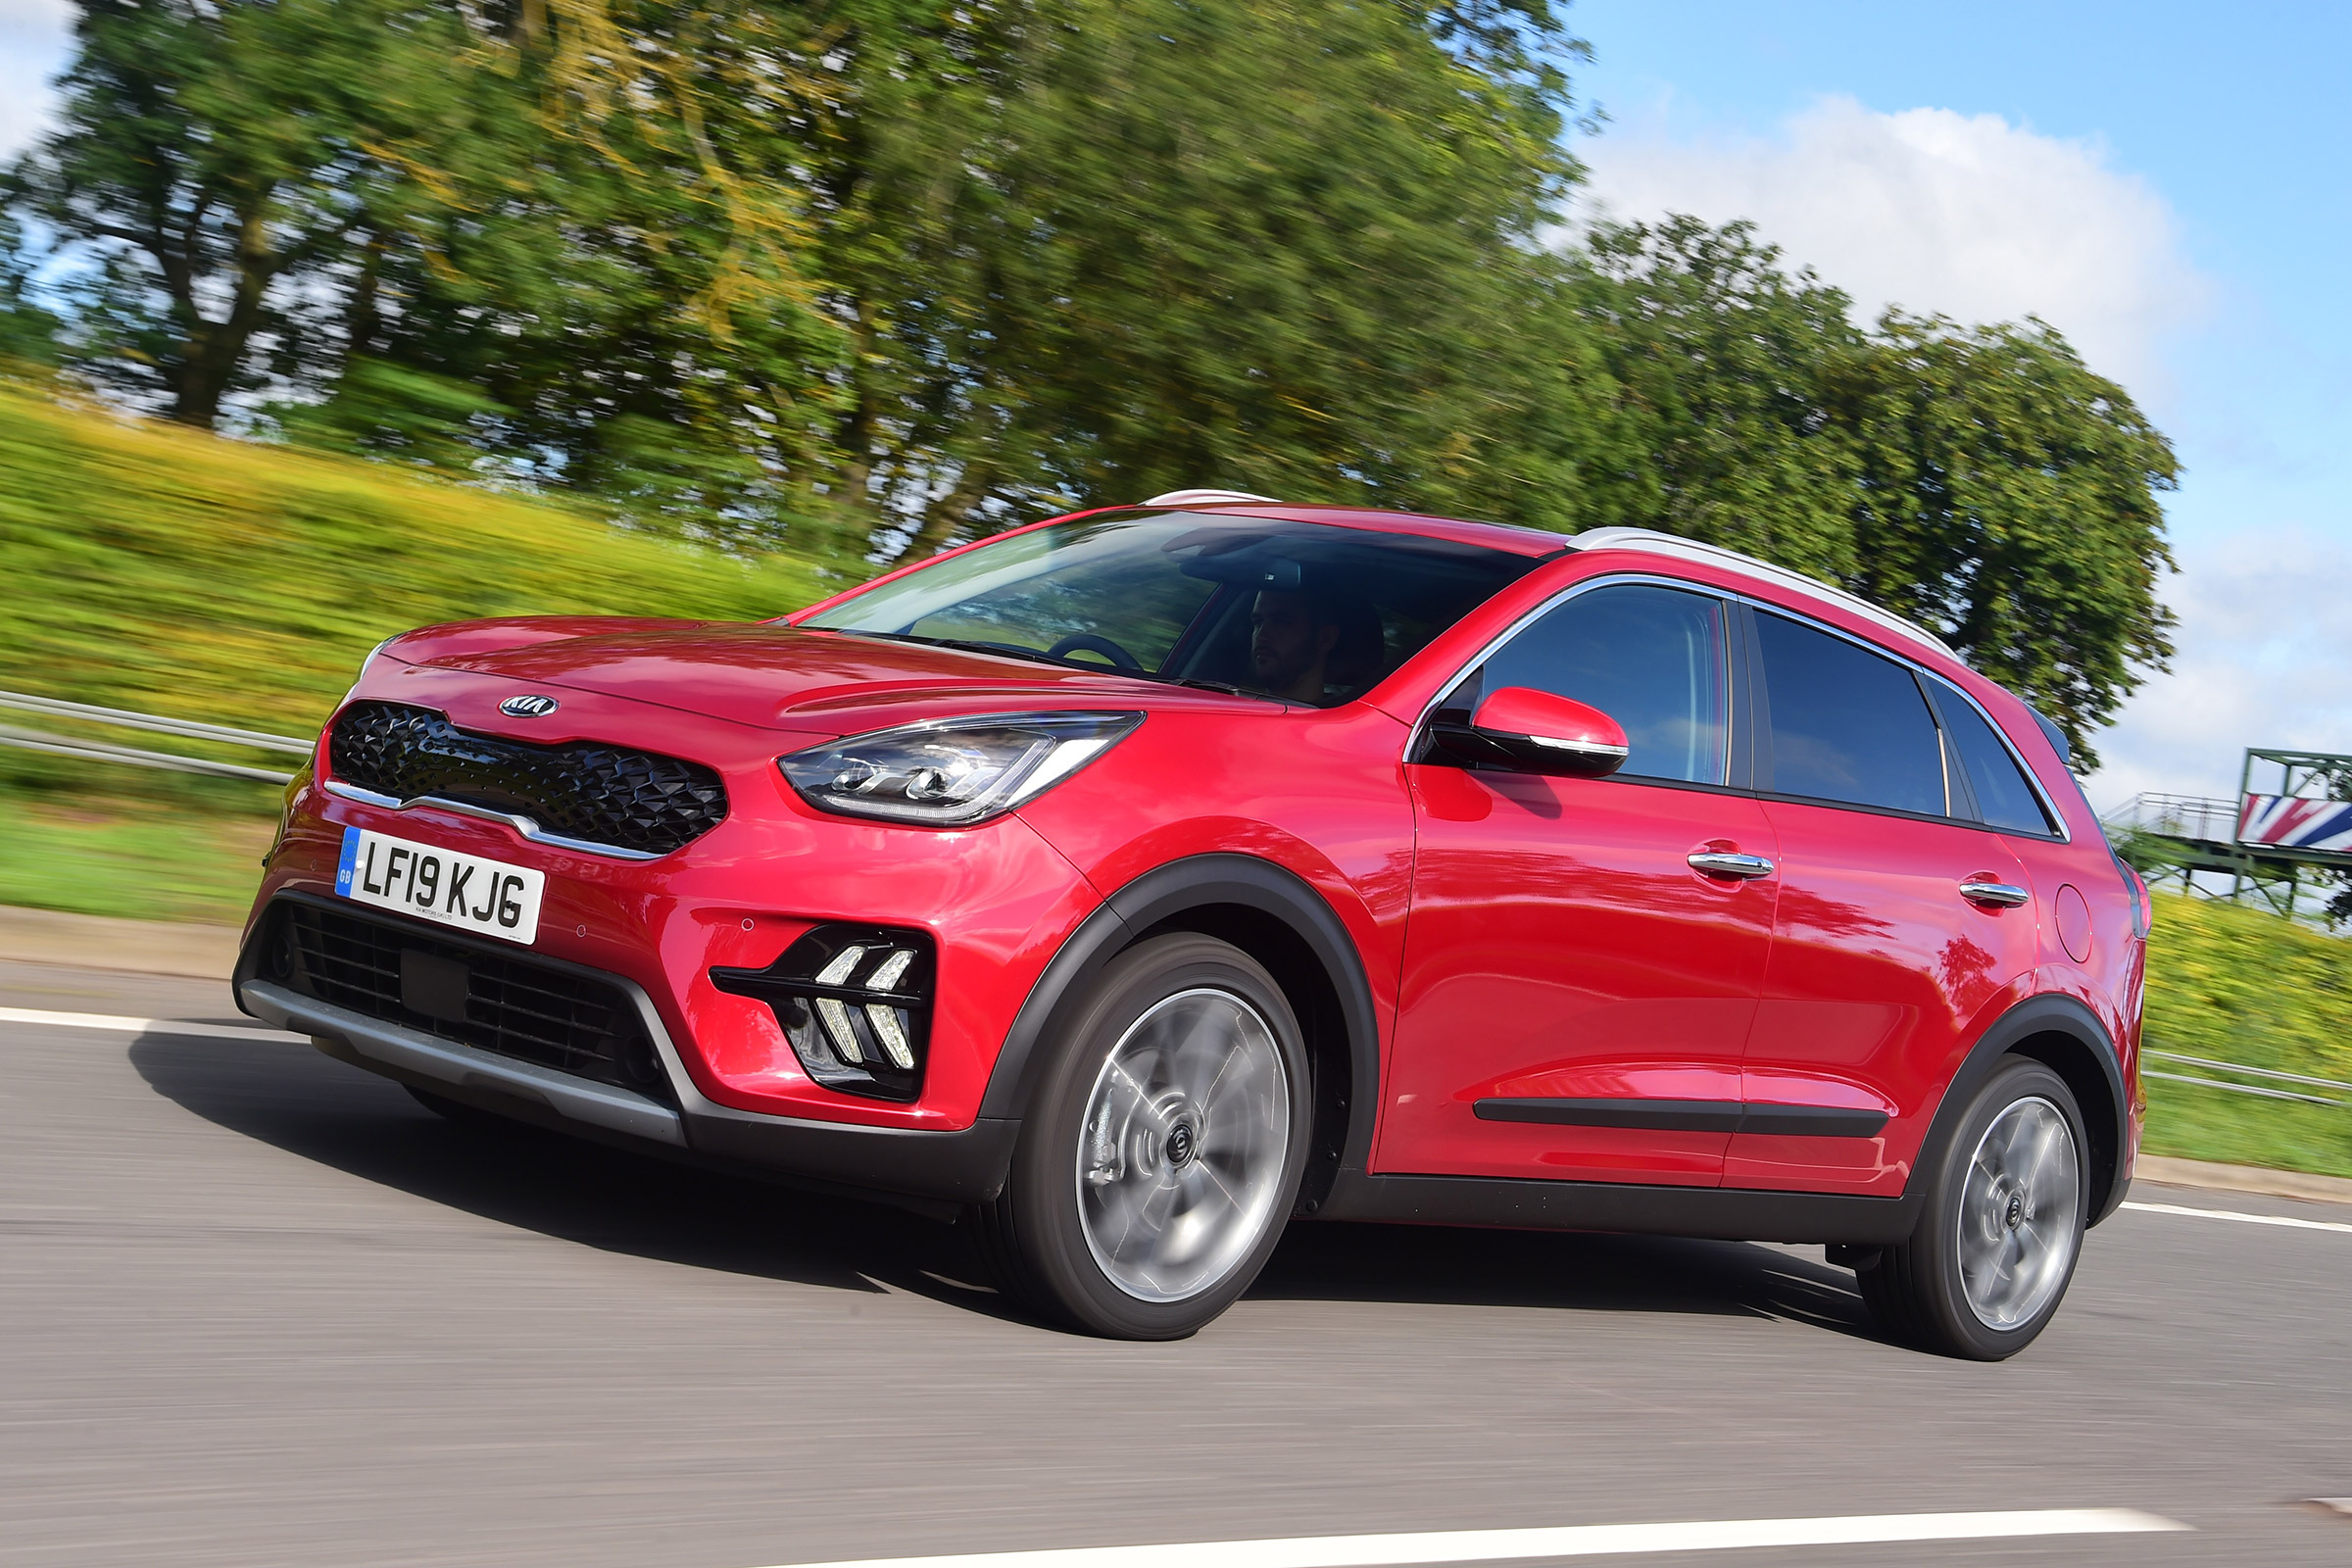 kia-niro-suv-review-pictures-carbuyer